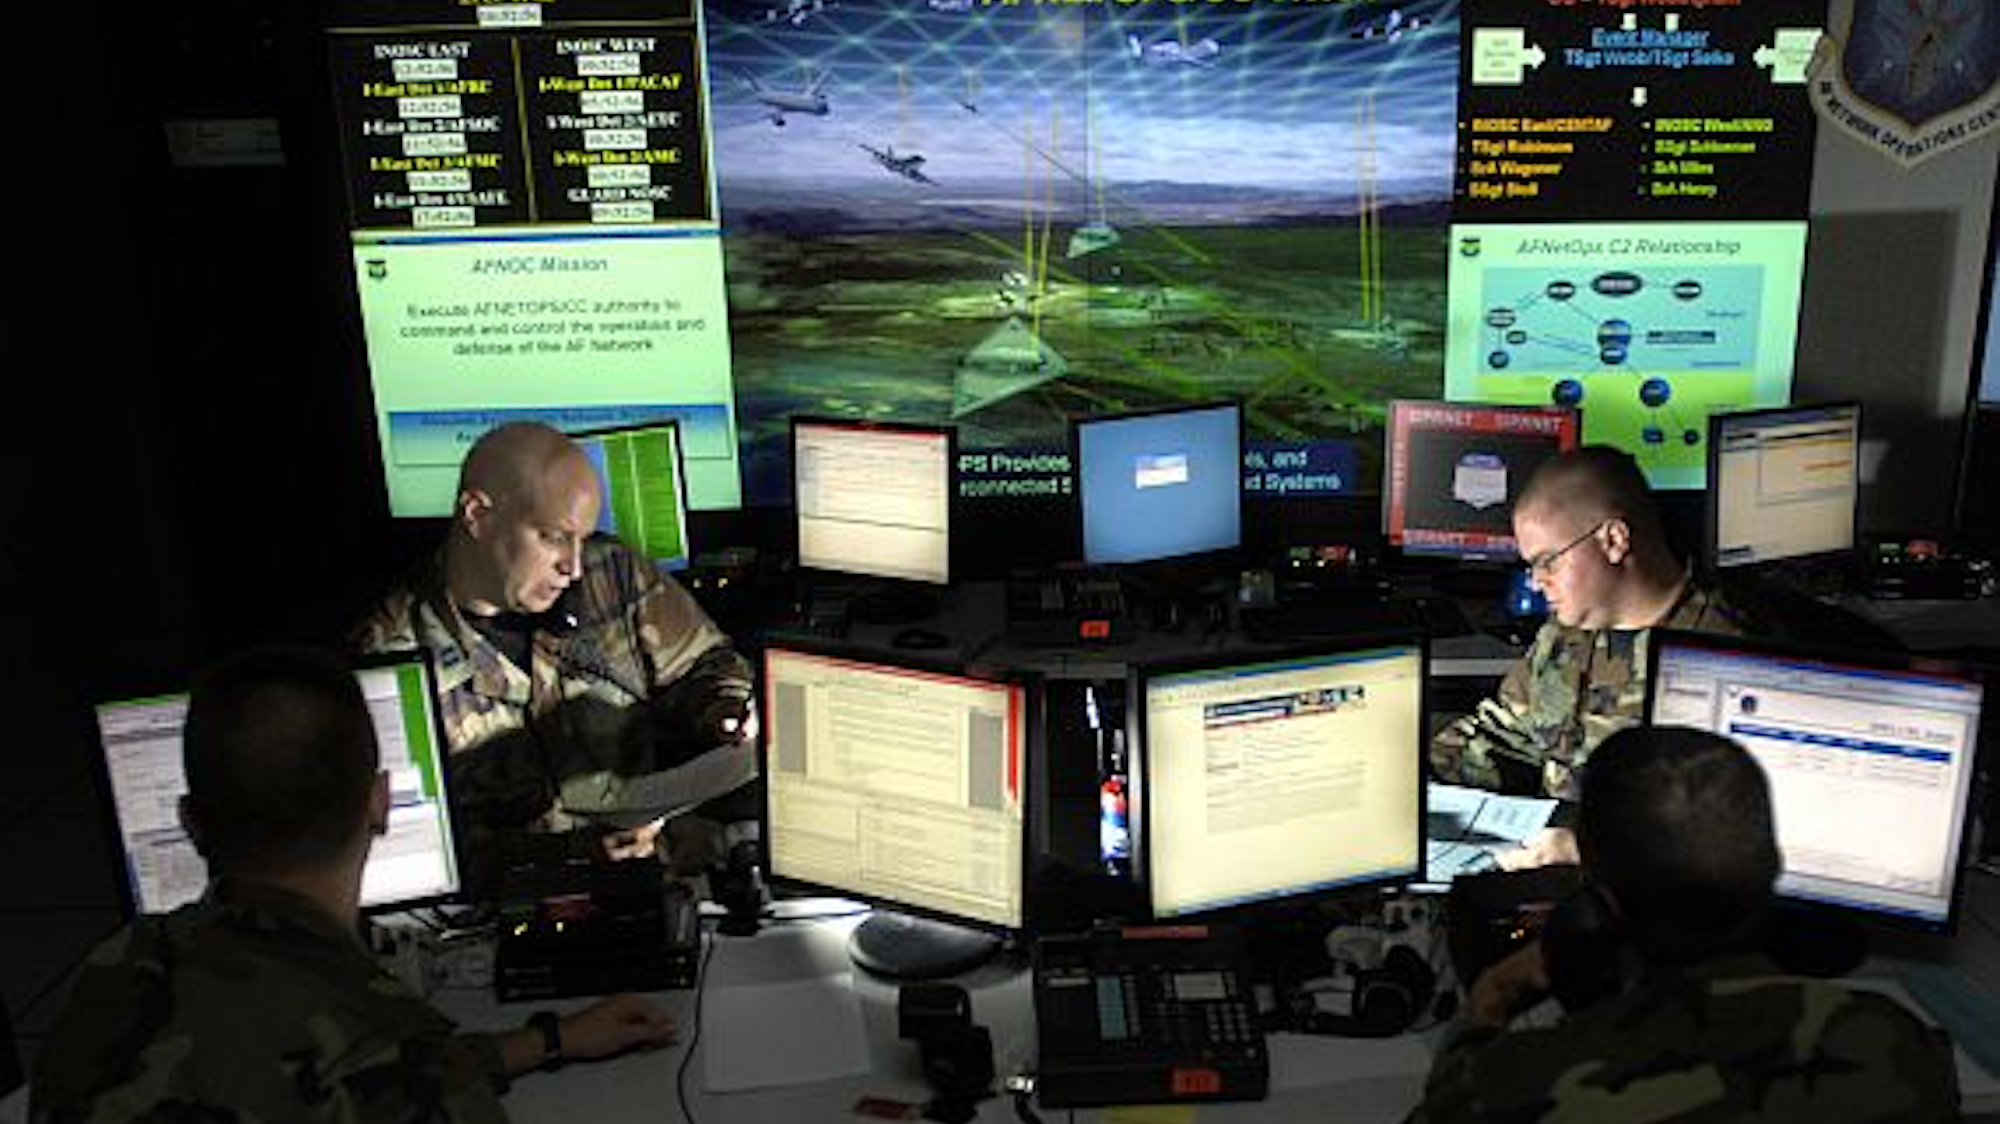 air-force-looks-to-cyberdefenses-inc-to-boost-cyber-security-at-information-network-gateways